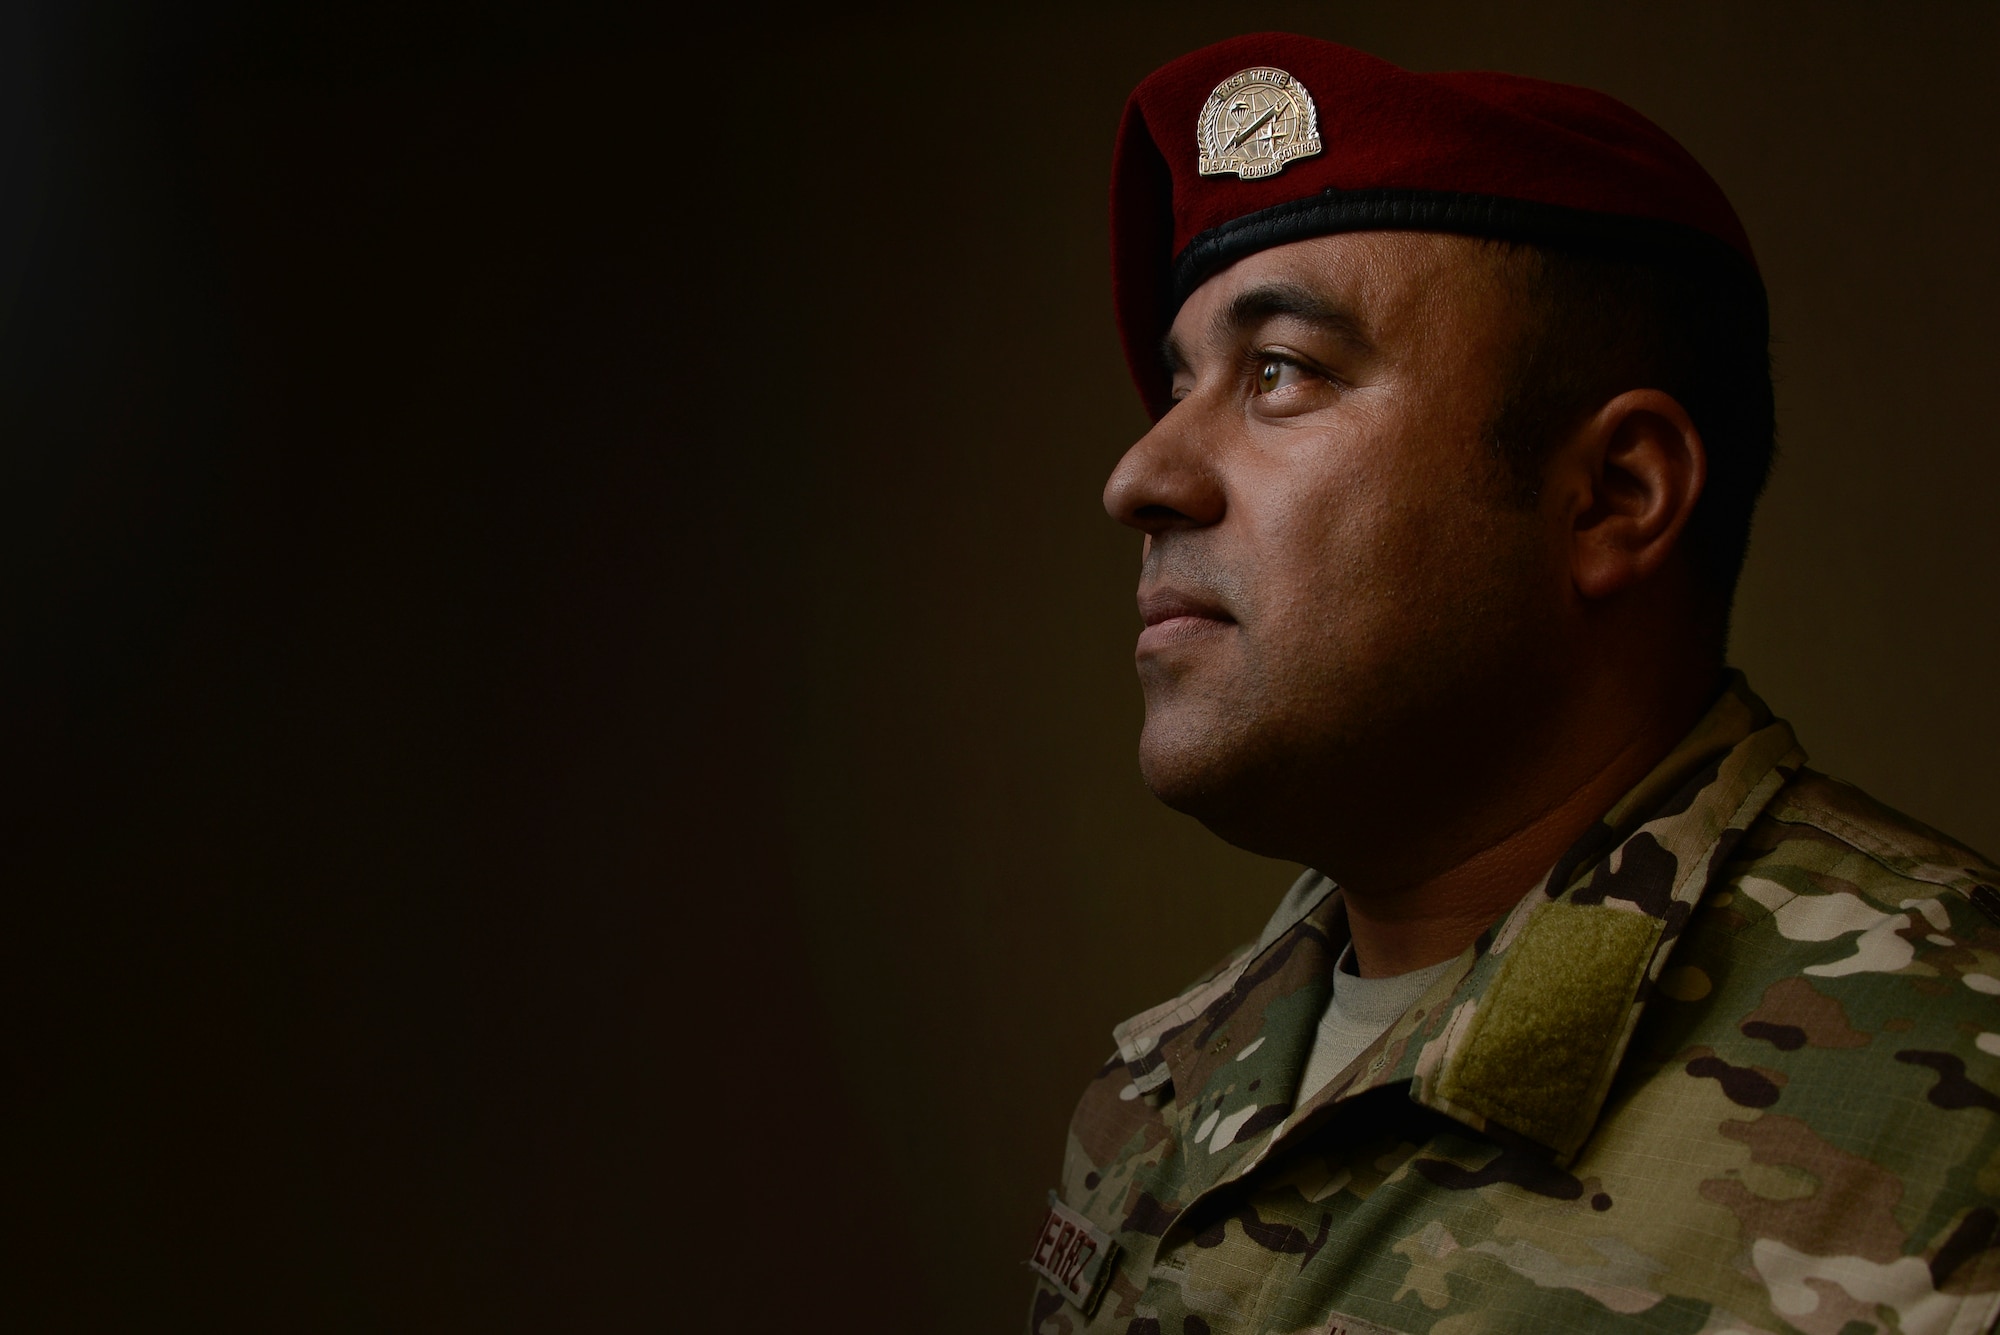 Master Sgt. Robert Gutierrez Jr., Battlefield Airmen Training Group standards, and evaluation, poses for a portrait May 18, 2018 in Laurel, Md.  Gutierrez is a combat controller who was on the team in Afghanistan in 2009 that conducted ad high-risk operations that eventually captured the second most powerful leader of the Taliban in that region. (U.S. Air Force photo by Staff Sgt. Alexandre Montes)